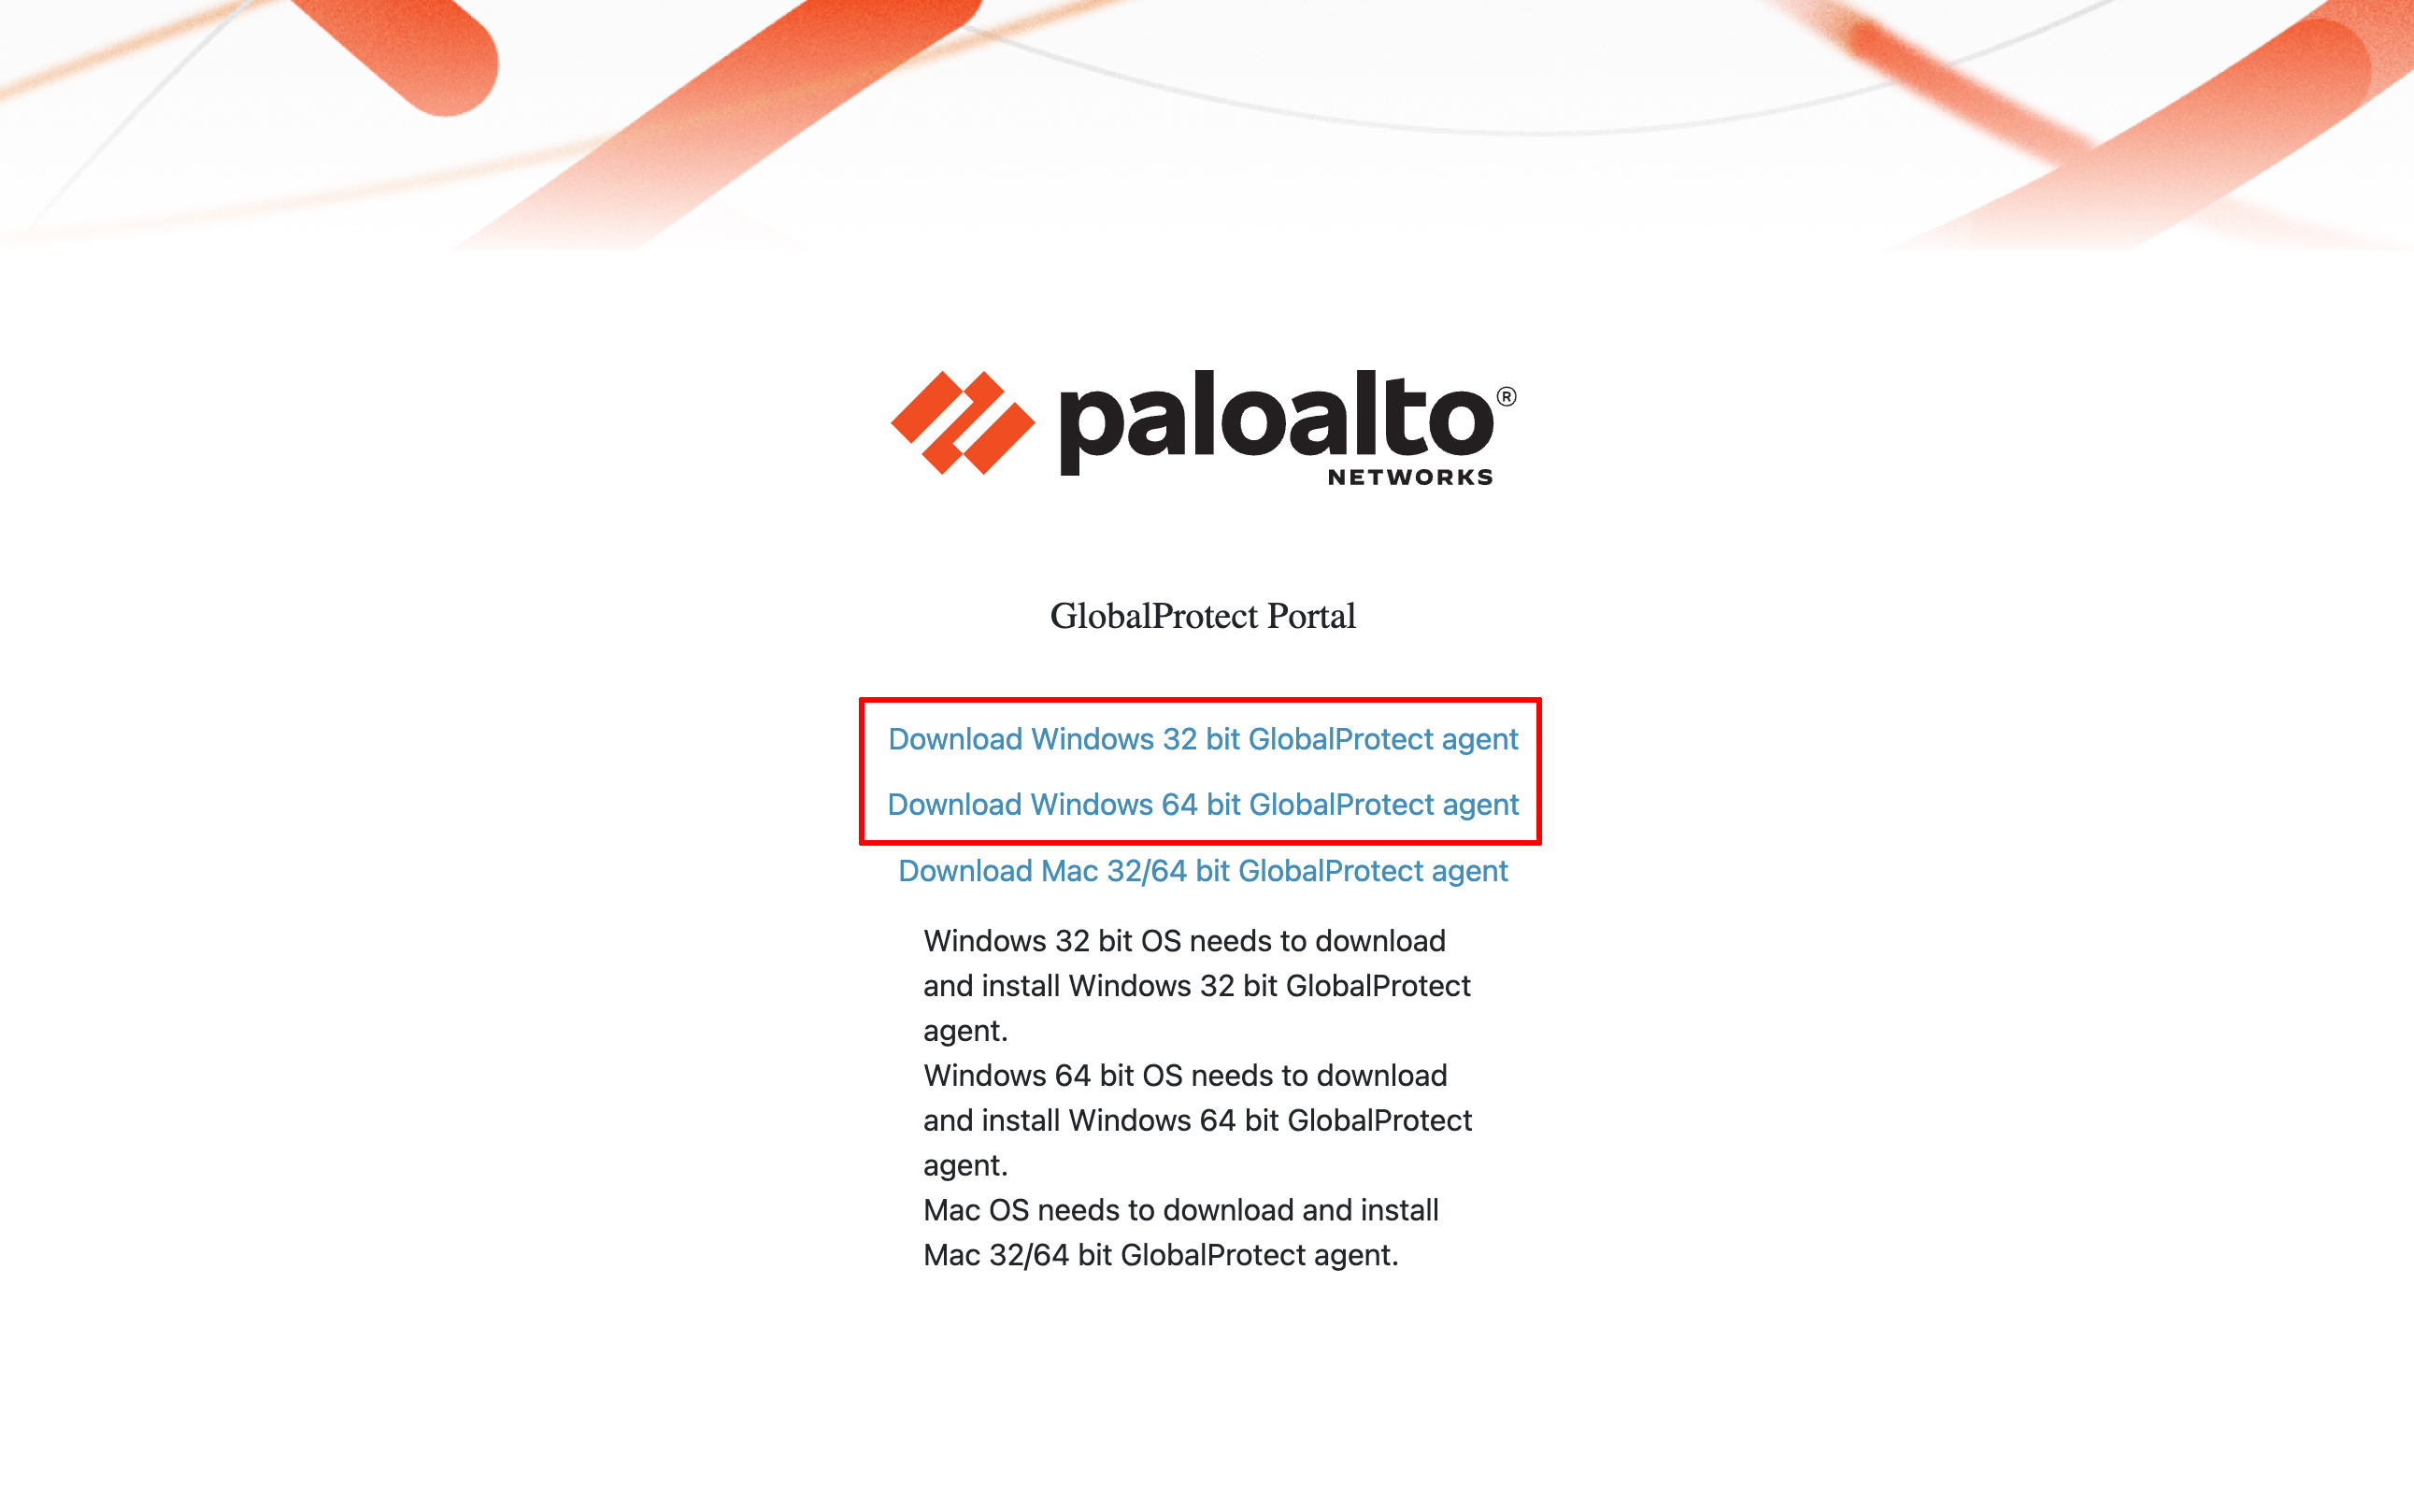 paloalto networks GlobalProtect download page. 'Download Windows 32 bit GlobalProtect agent' is highlighted